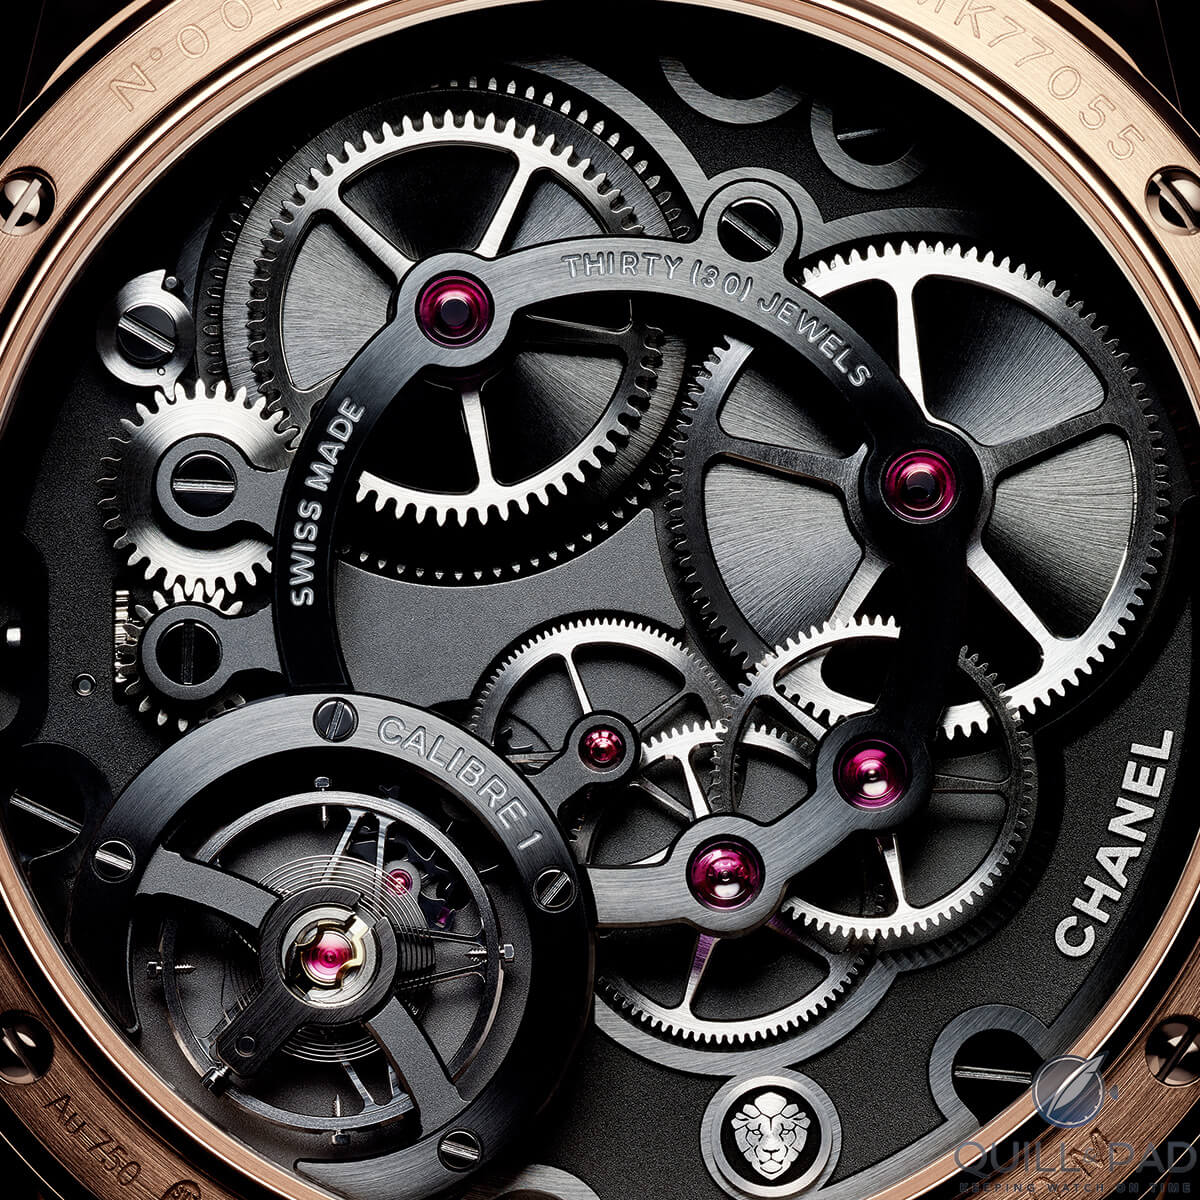 The very distinctive look of the beautifully finished movement of the Monsieur de Chanel